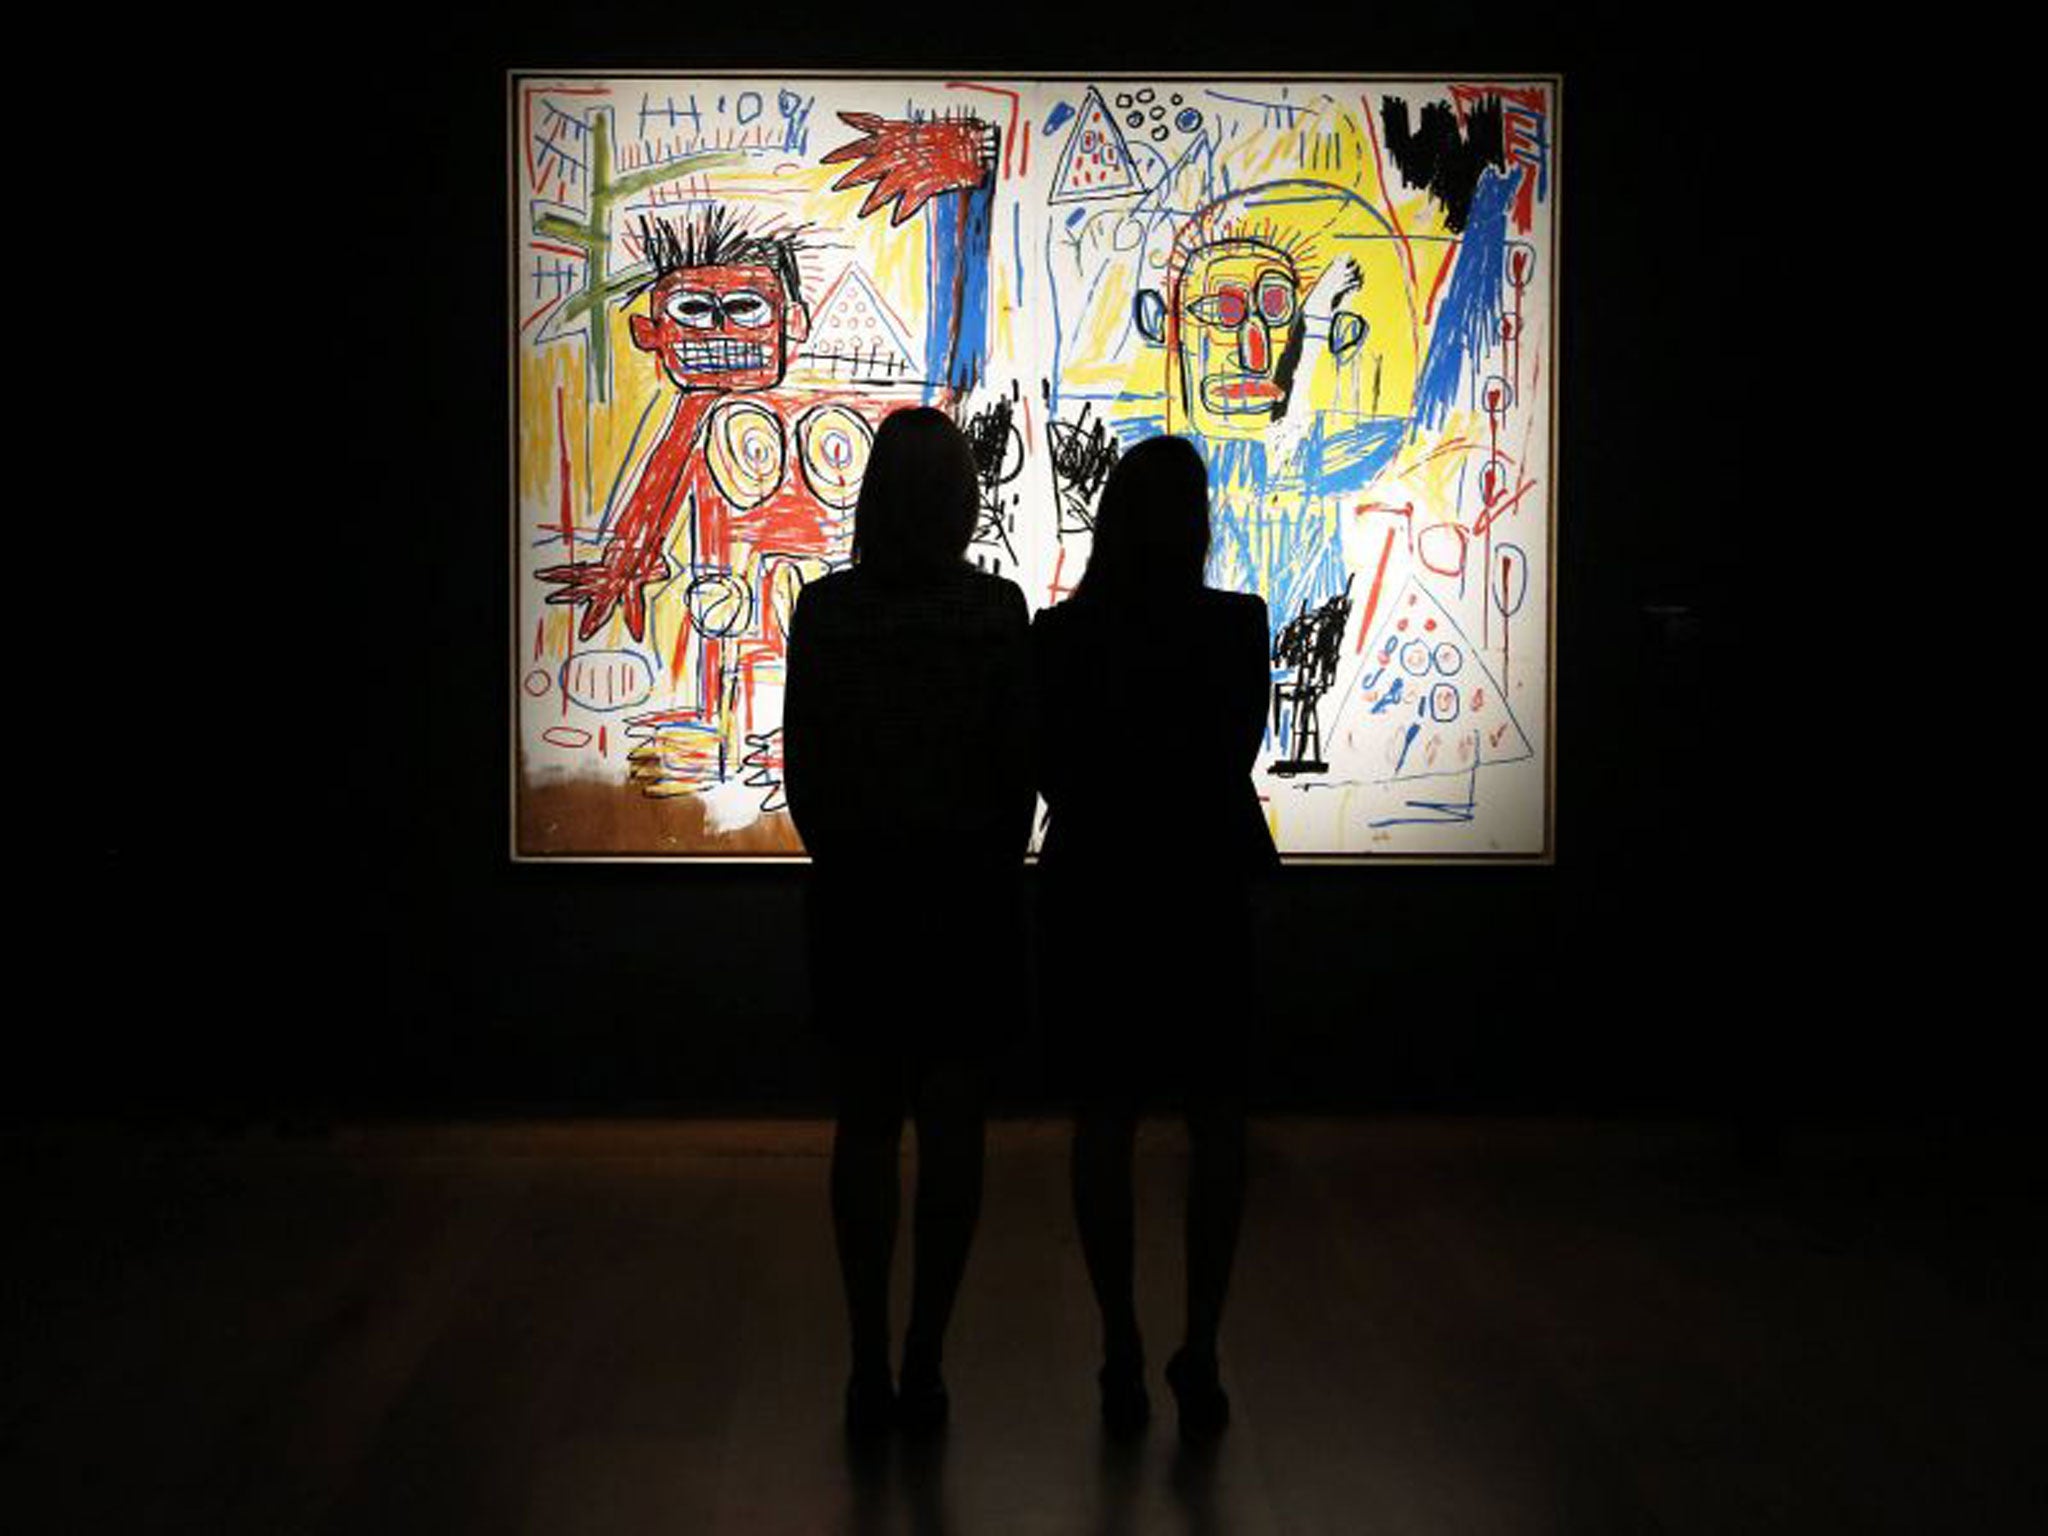 Jean-Michel Basquiat’s Untitled is part of Christie’s opening sale